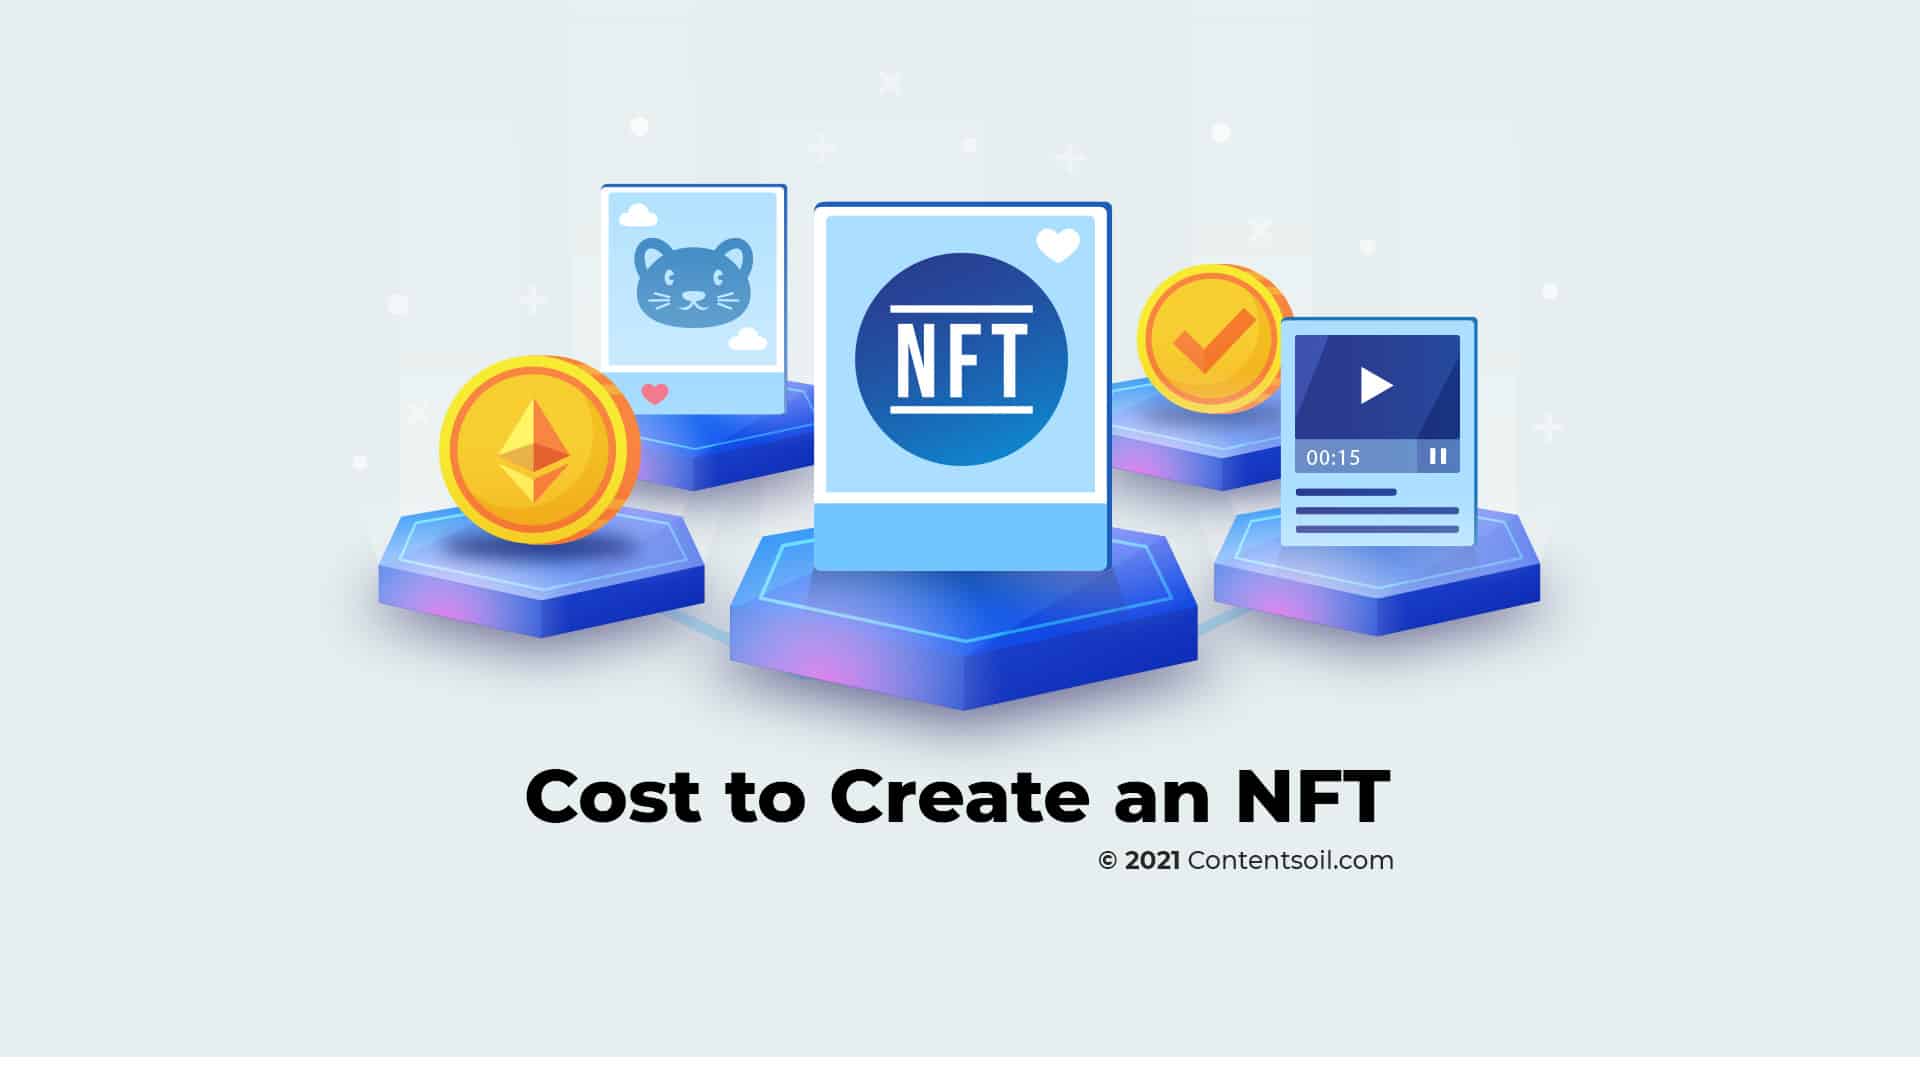 Cost To Create an NFT